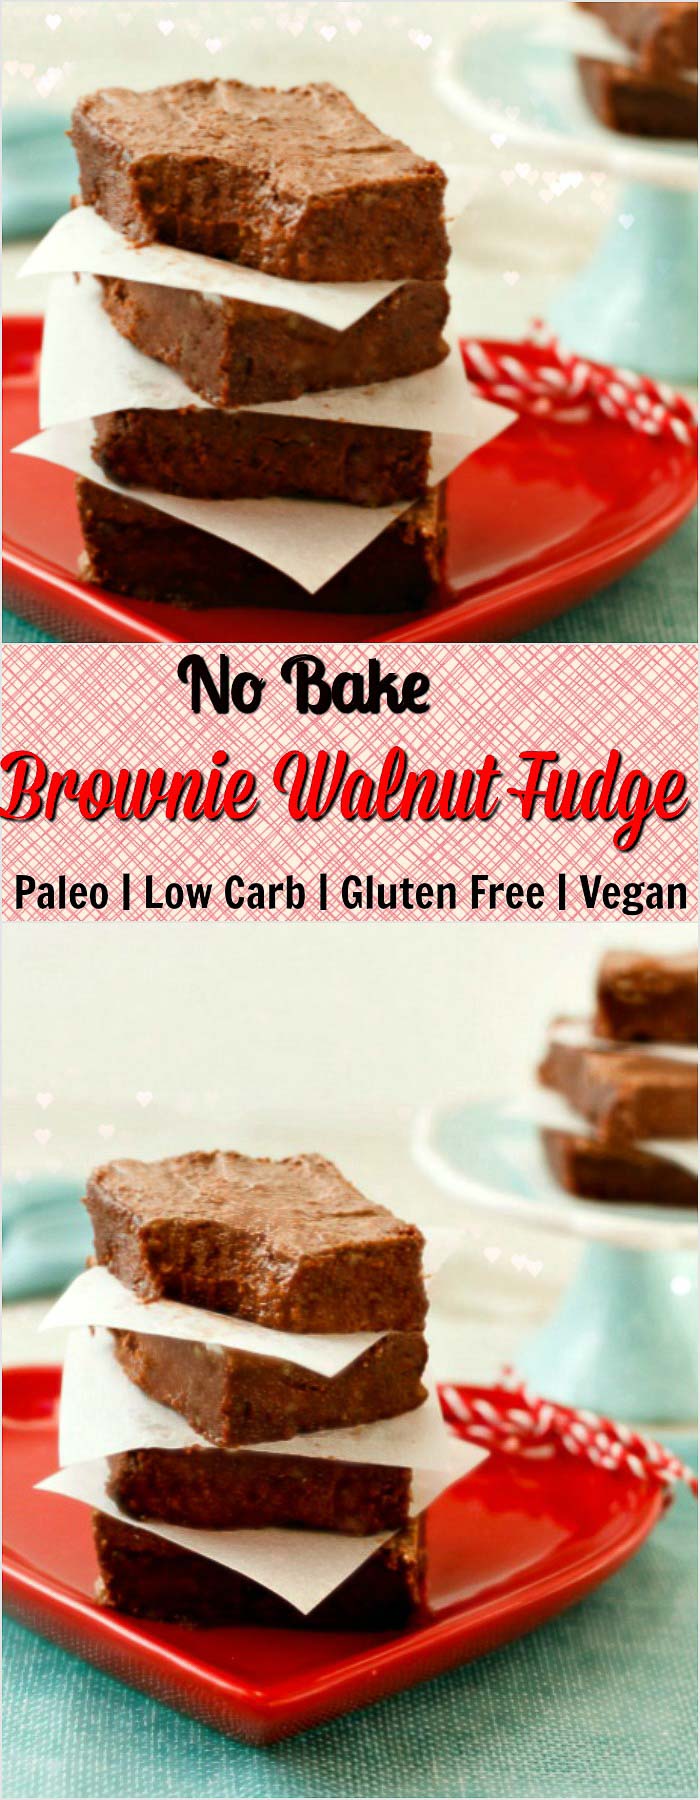 No Bake Frosted Brownie Walnut Fudge- paleo, low carb and vegan.